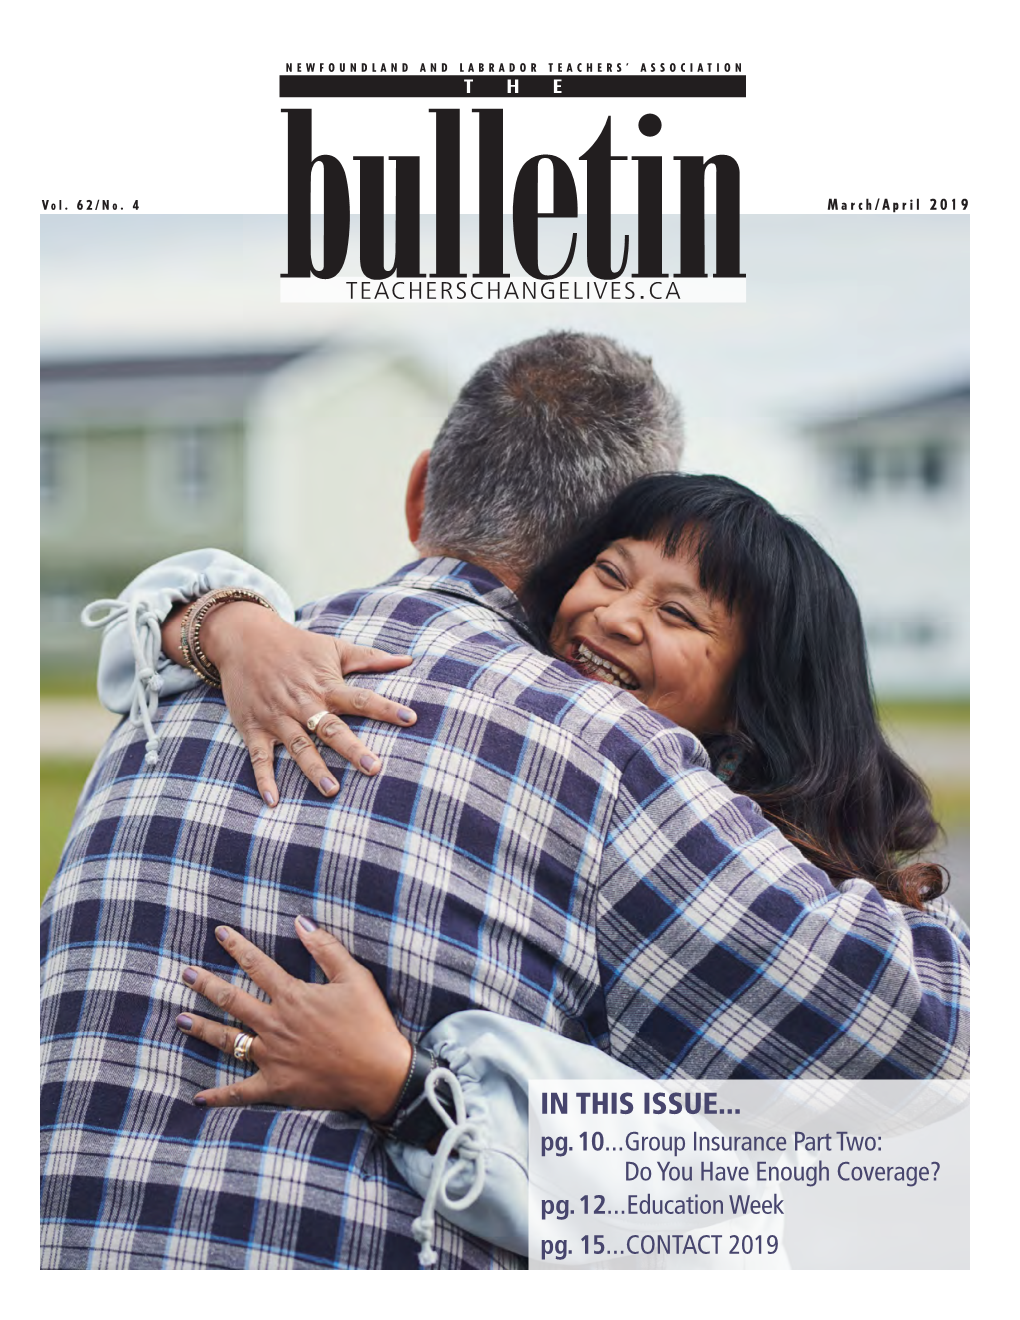 The Bulletin, Vol. 62 No. 4, March/April 2019 from the NL